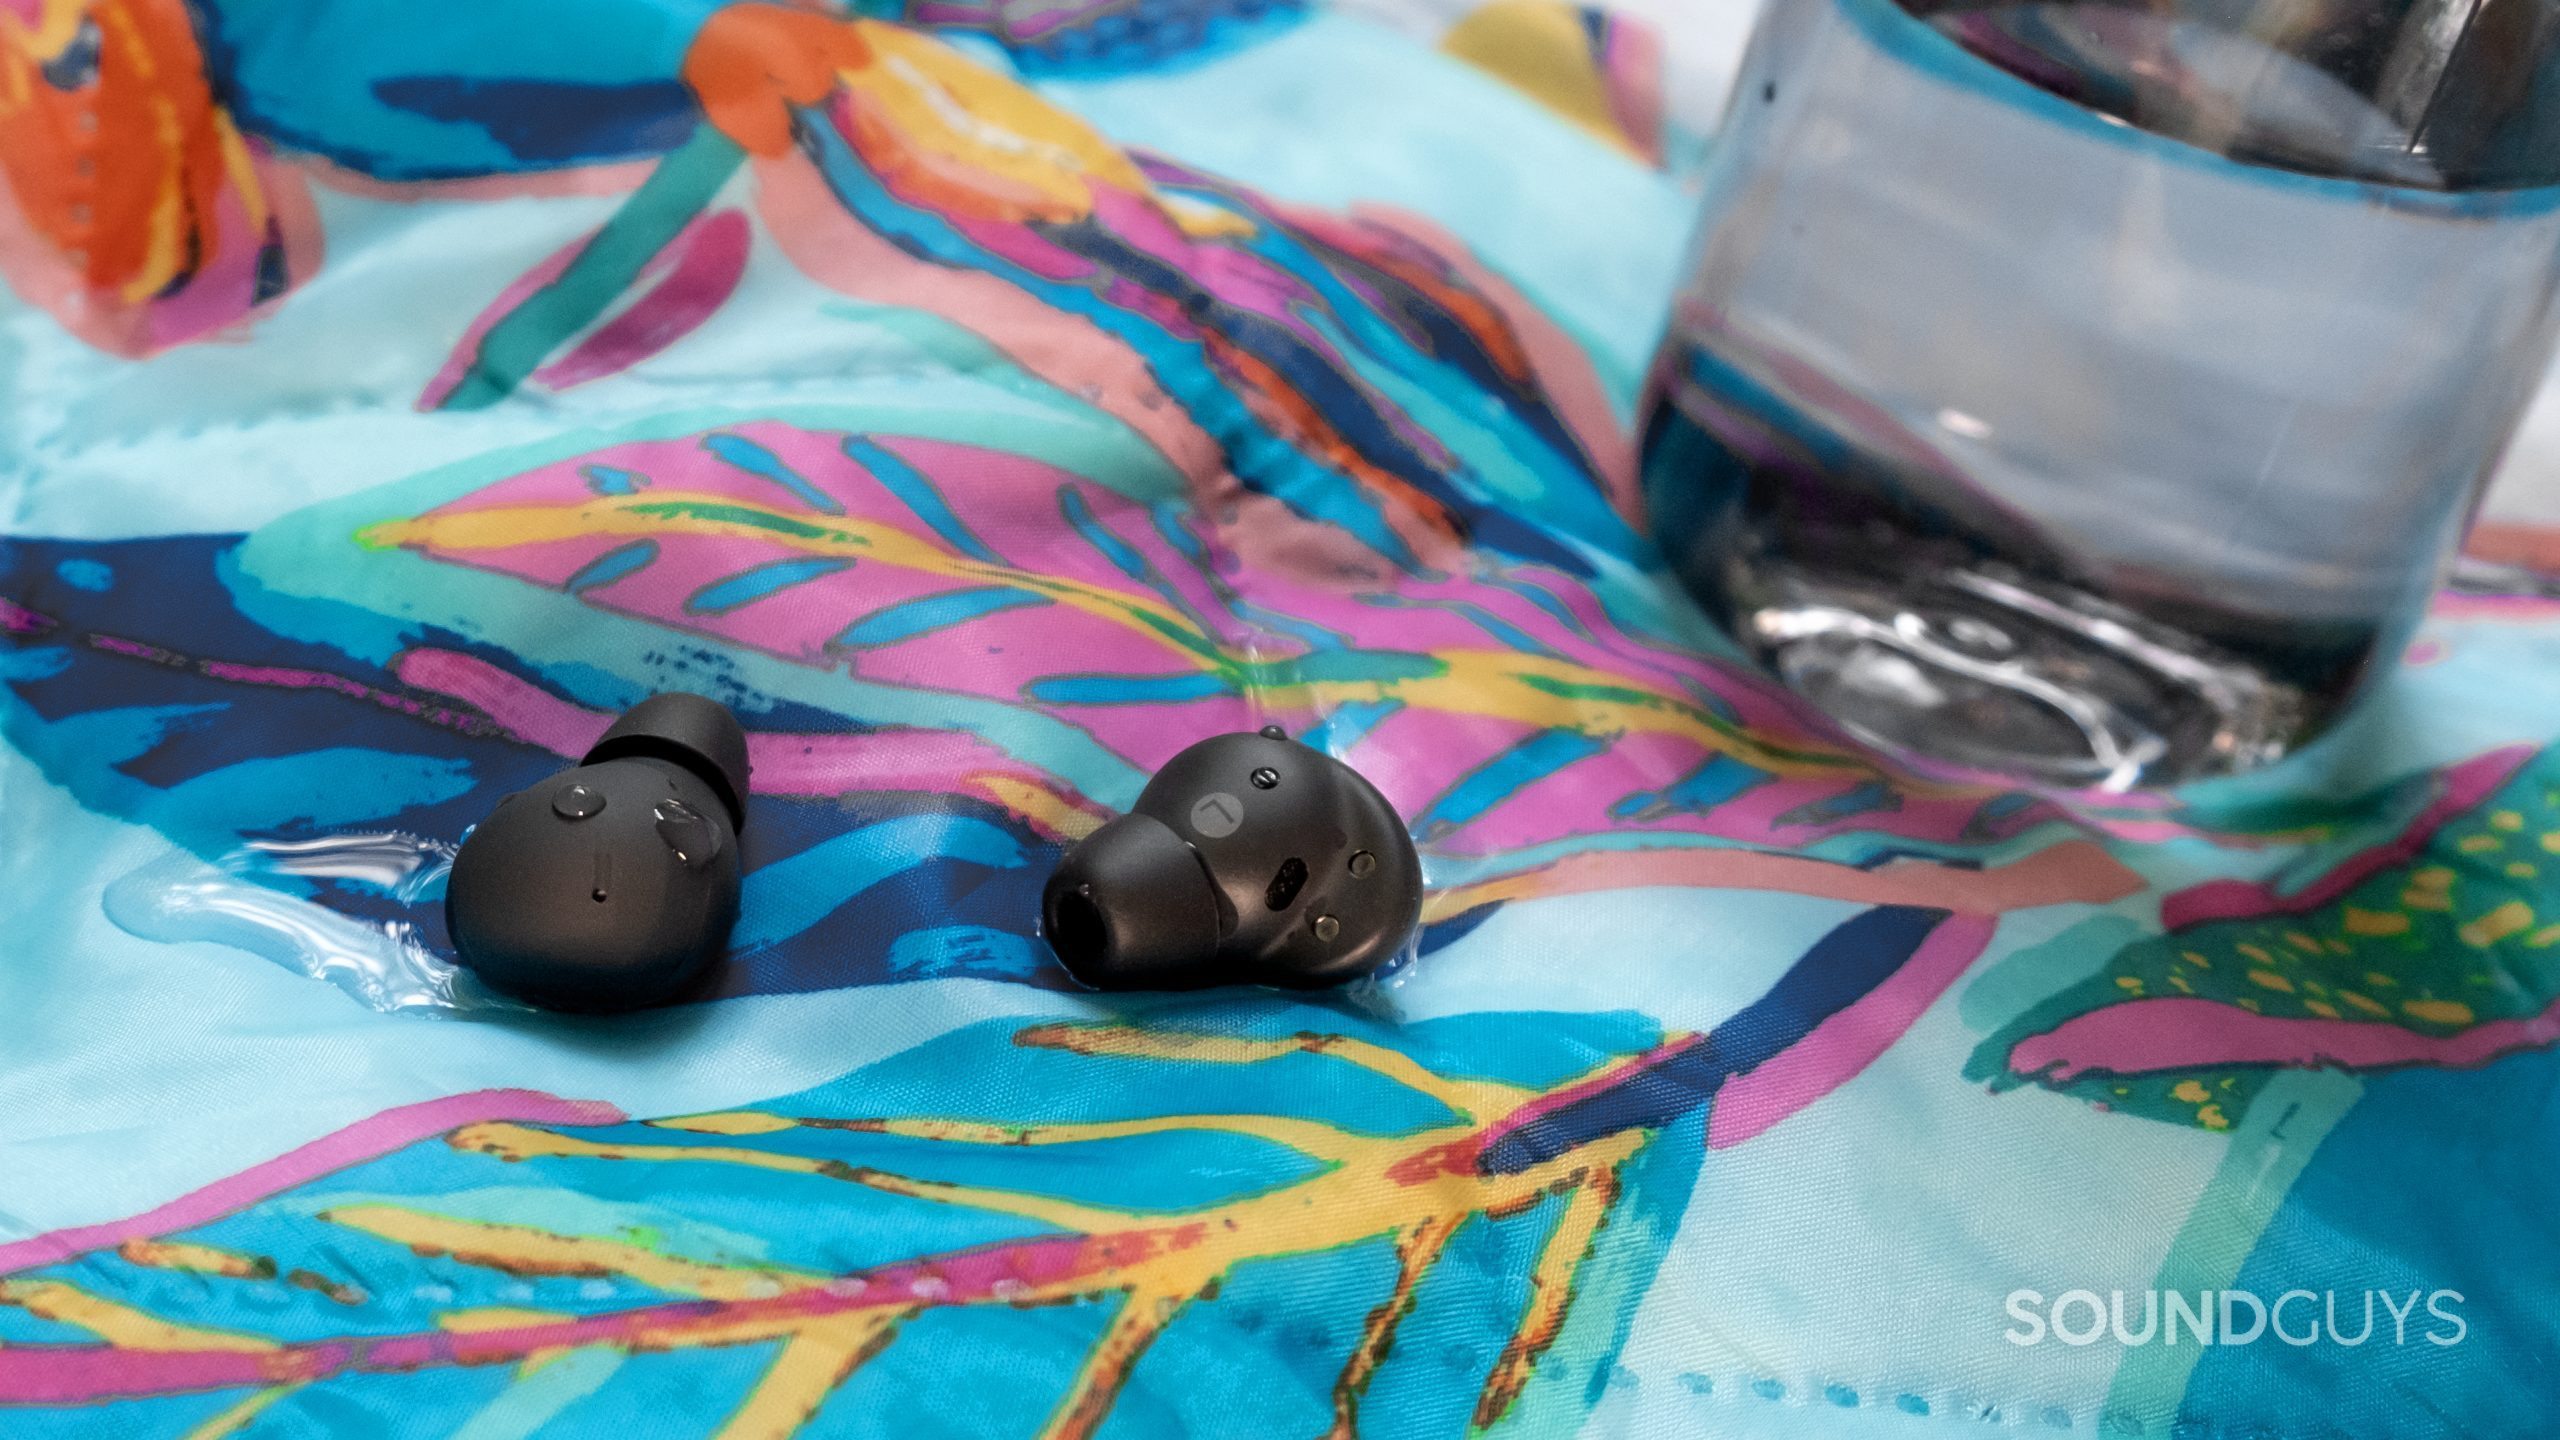 The Samsung Galaxy Buds 2 Pro are sitting in and covered in water droplets on a tropical themed outdoor blanket with a water bottle in the background.